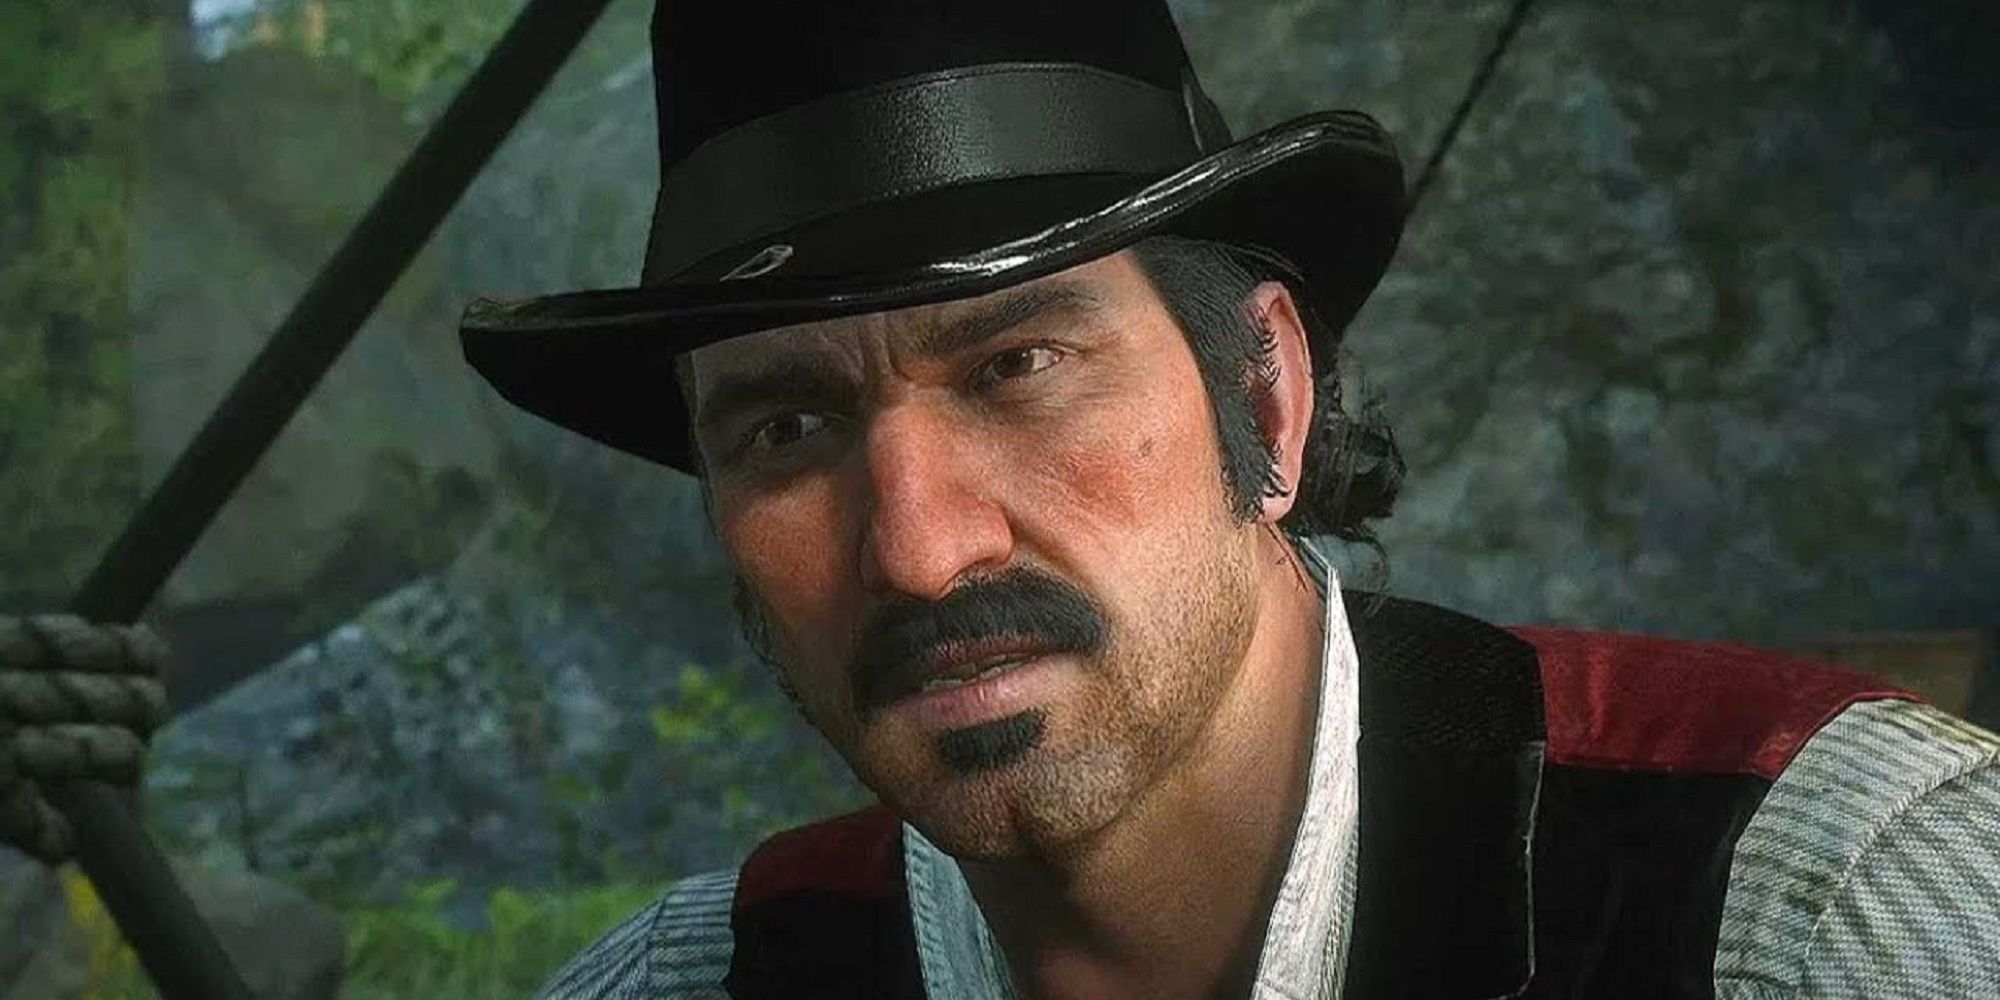 Dutch Scowling At Someone Off Camera